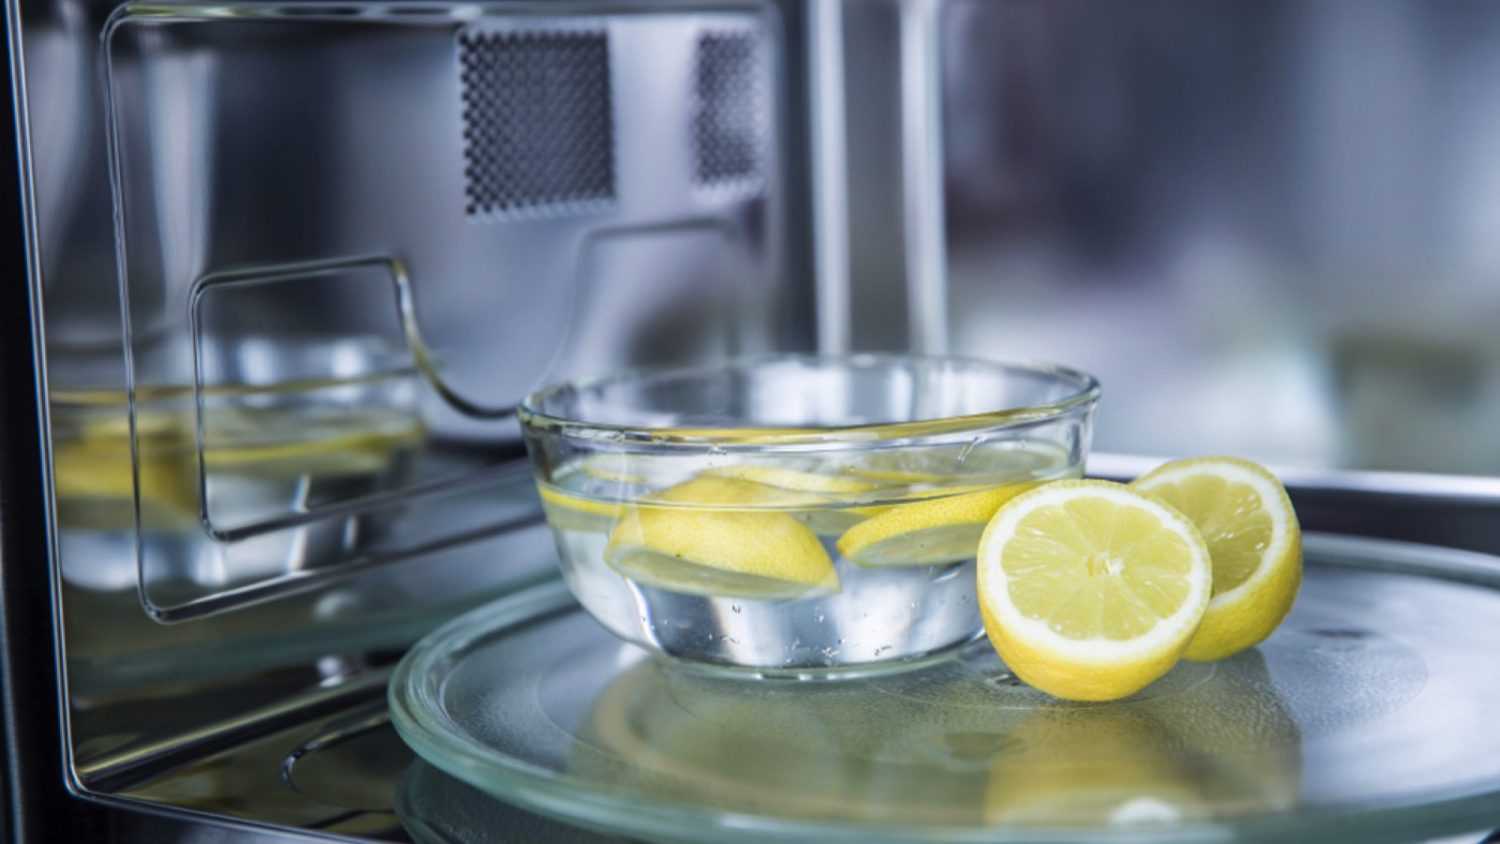 Cleaning microwave with lemon